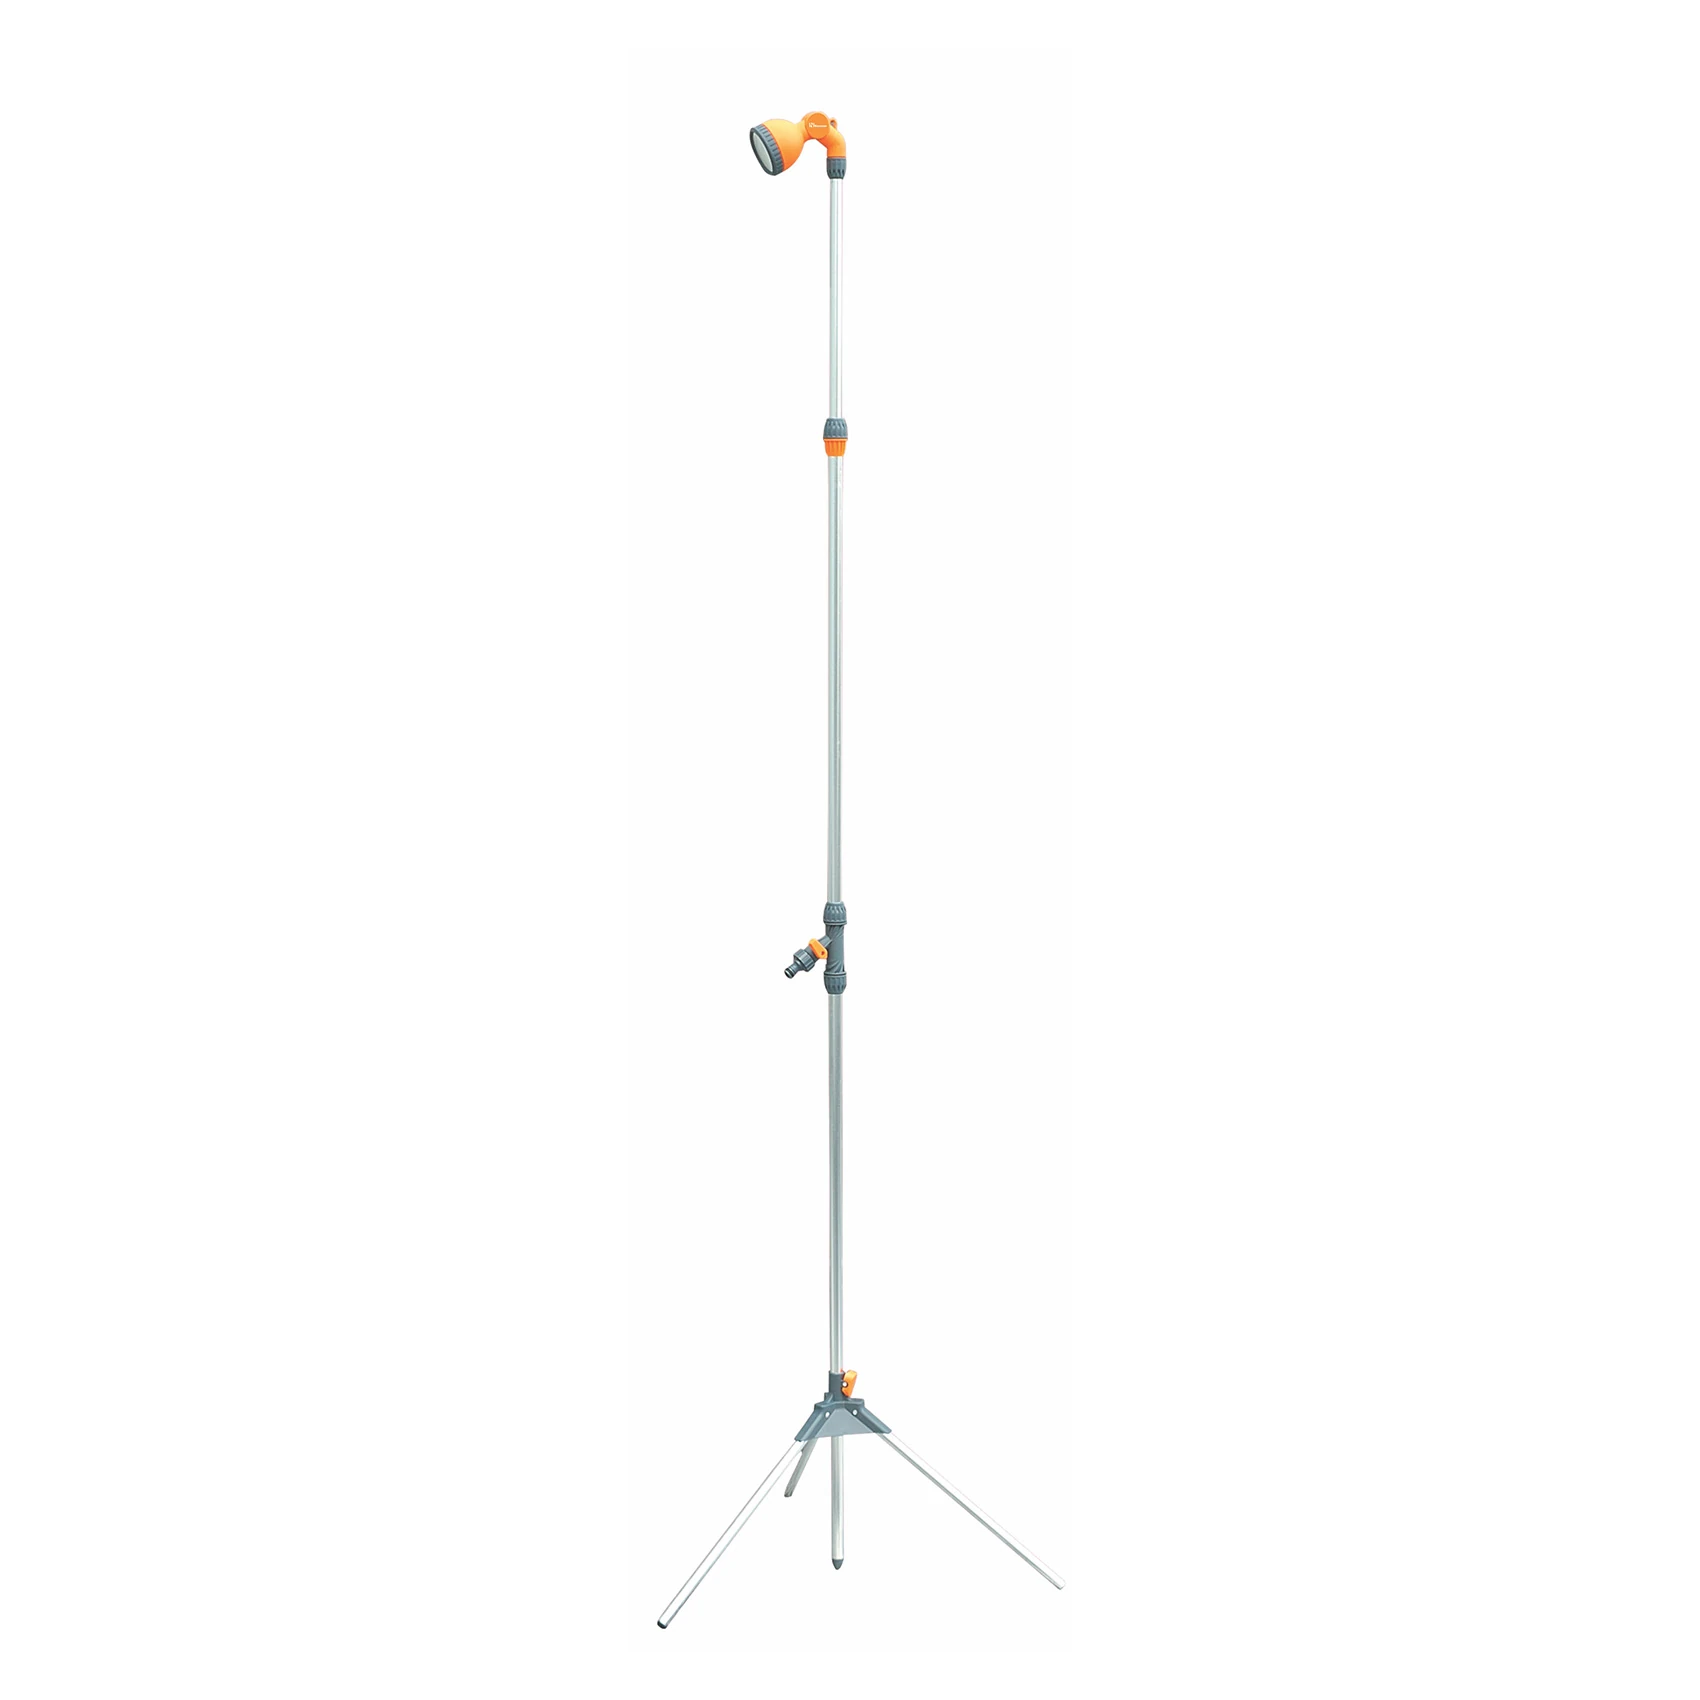 NAMSON MULTI PURPOSE GARDEN SHOWER WITH TRIPODE |PORTABLE SHOWER | CAMPING SHOWER YM6102